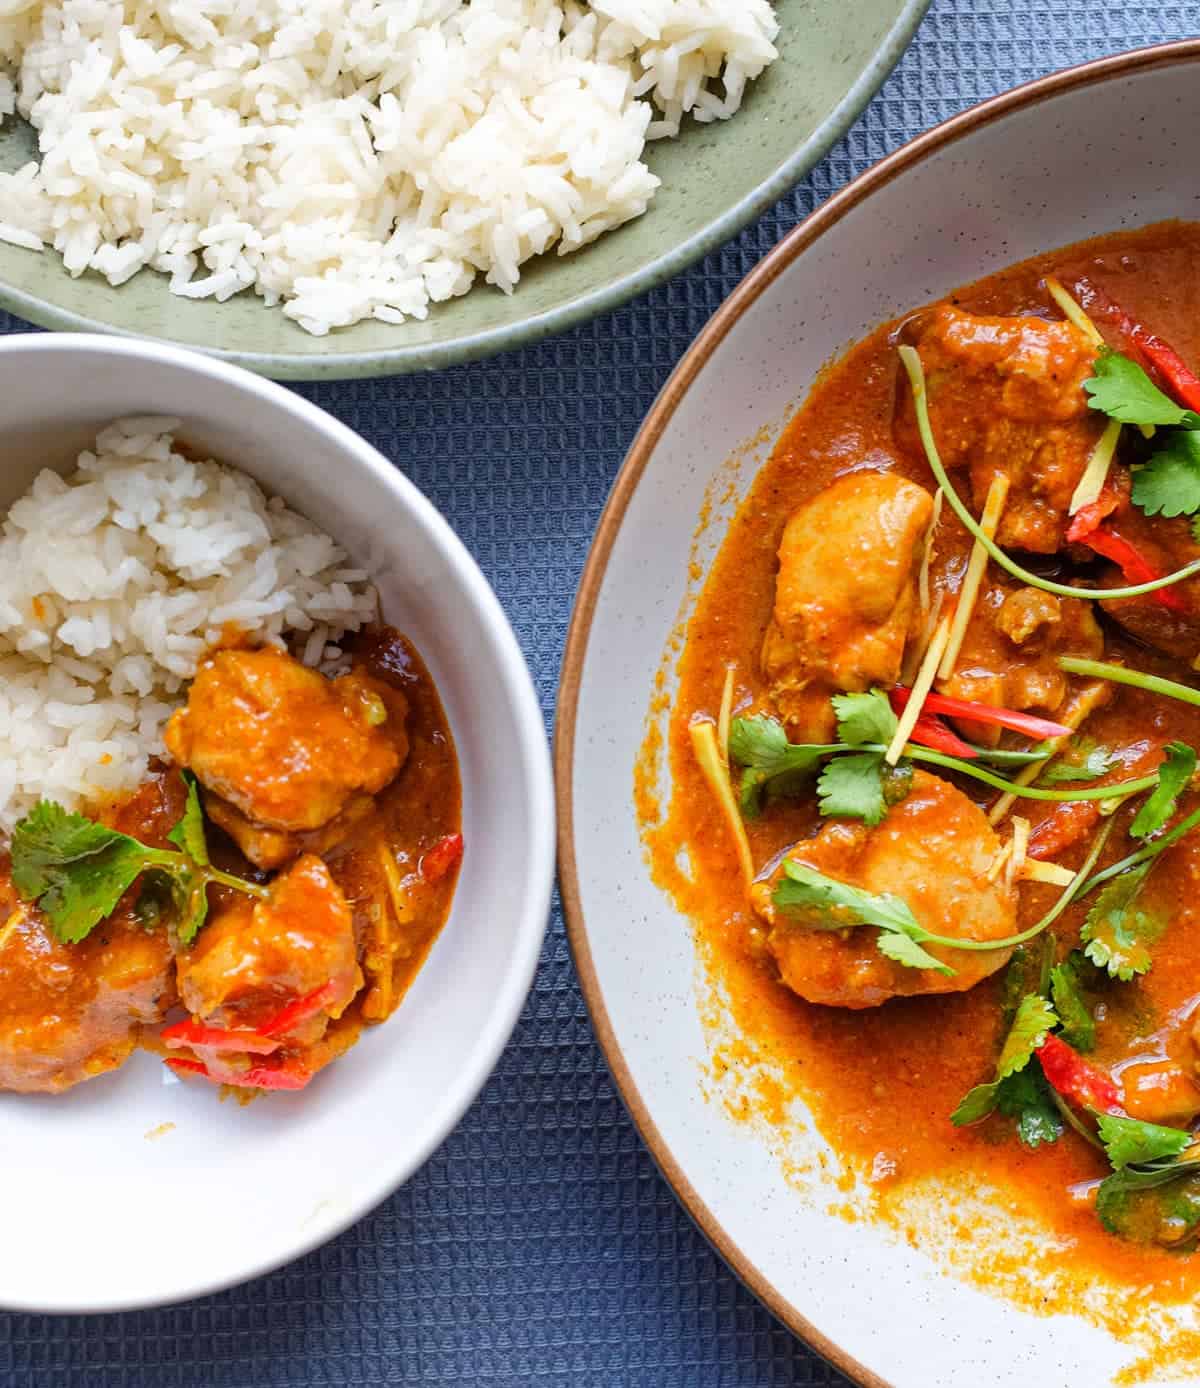 Bowls of Burmese chicken curry with rice